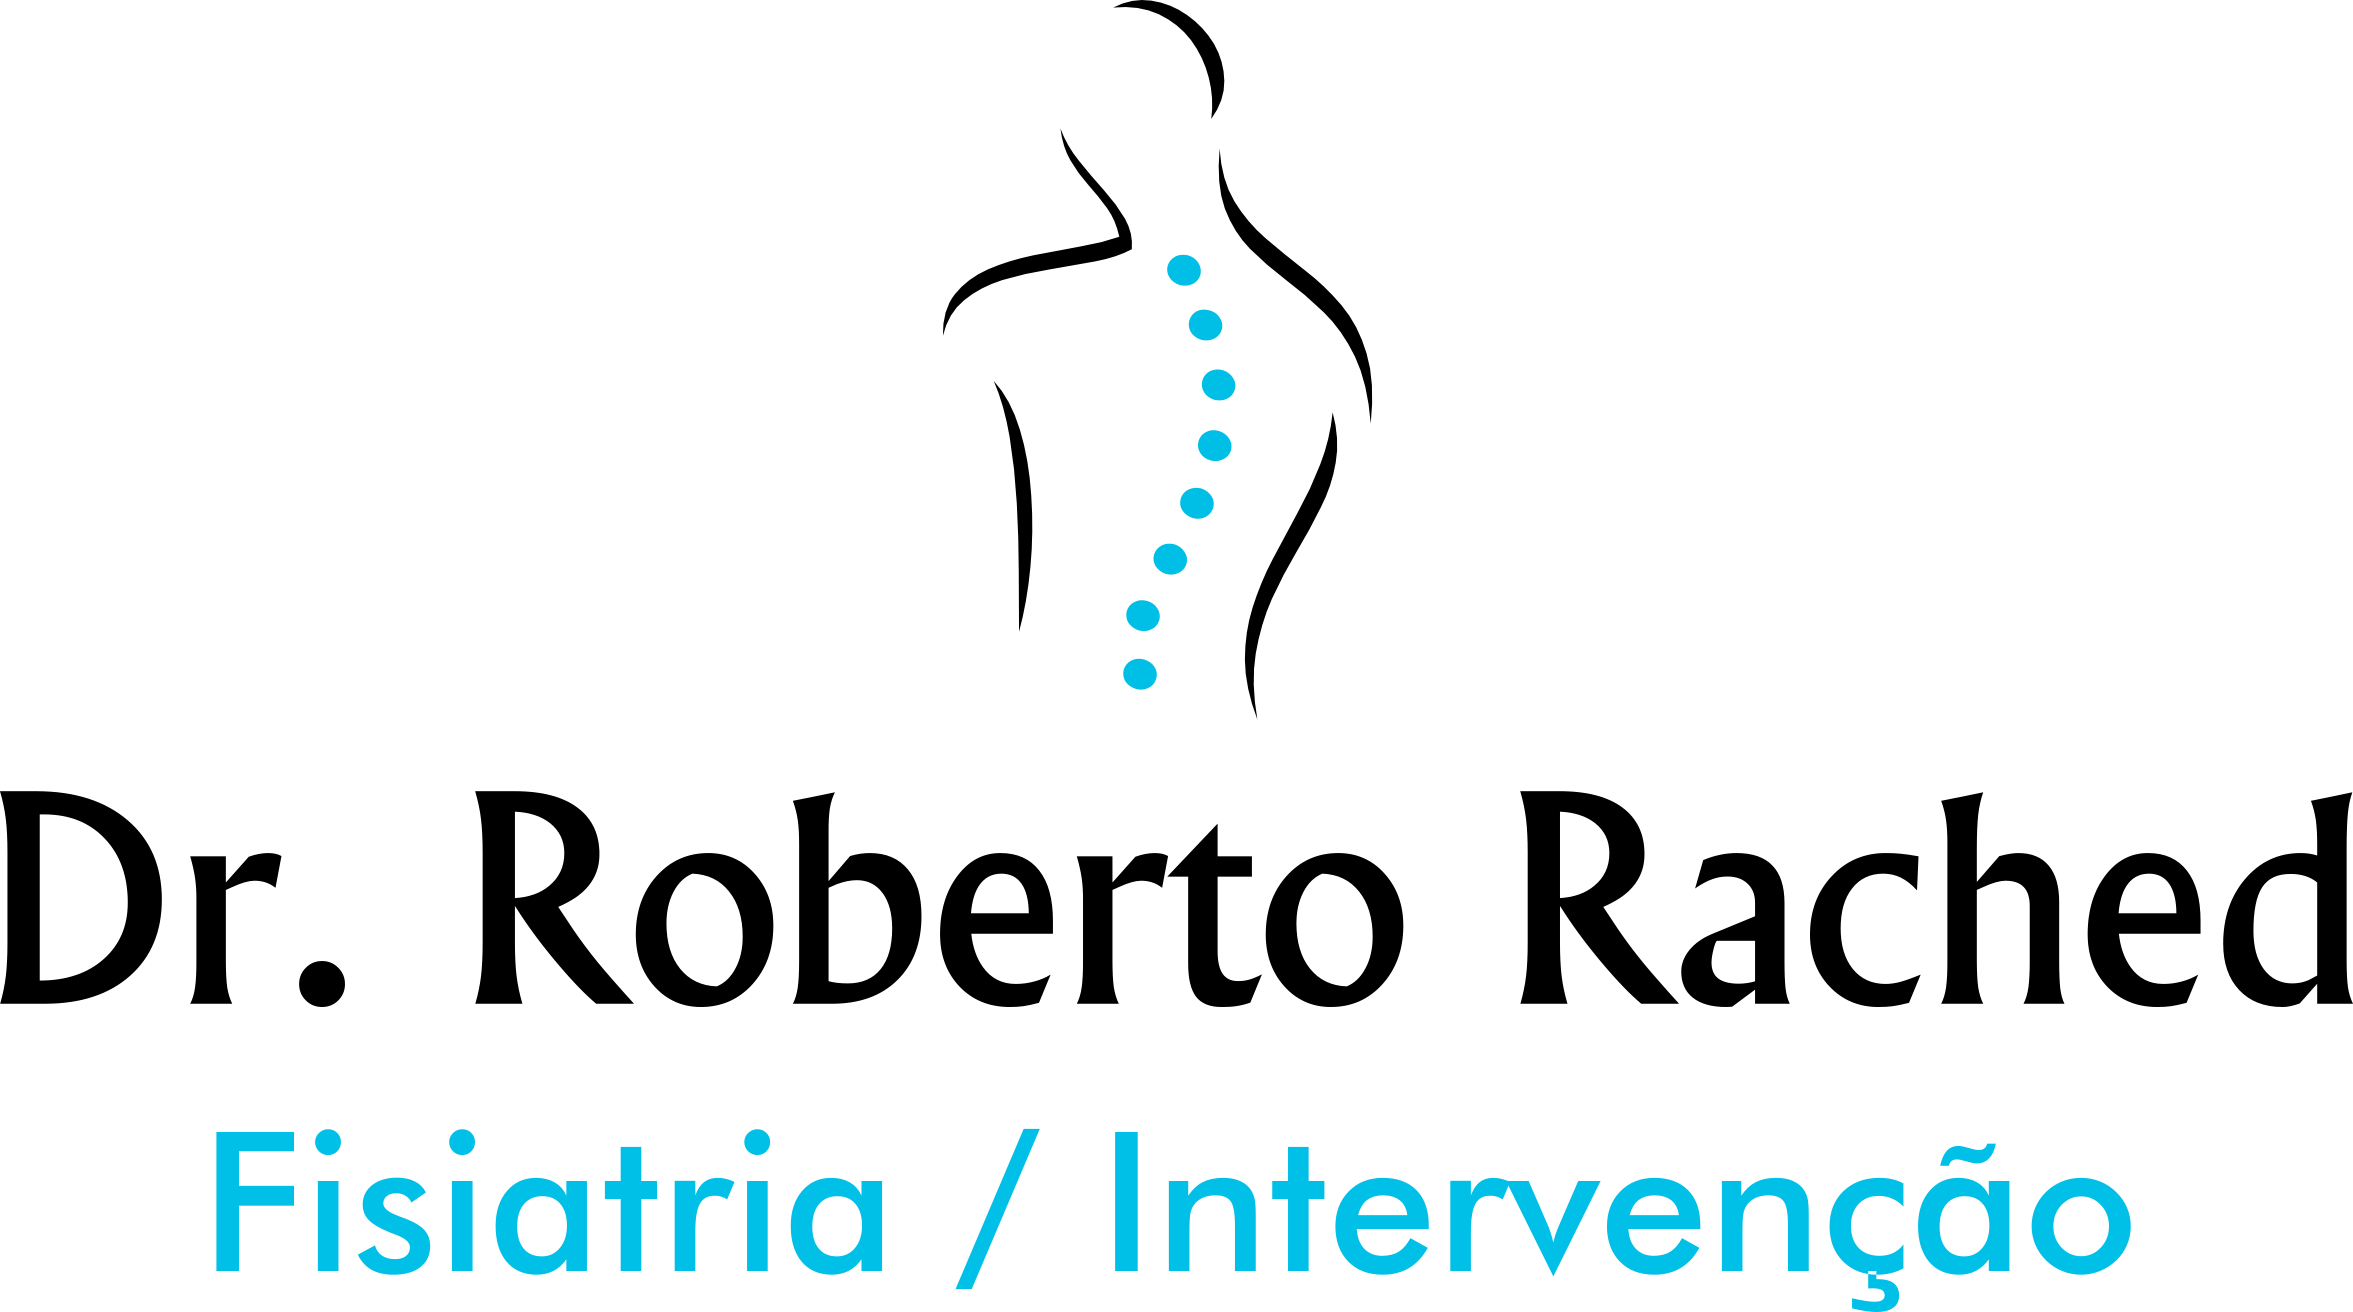 Dr. Roberto Rached